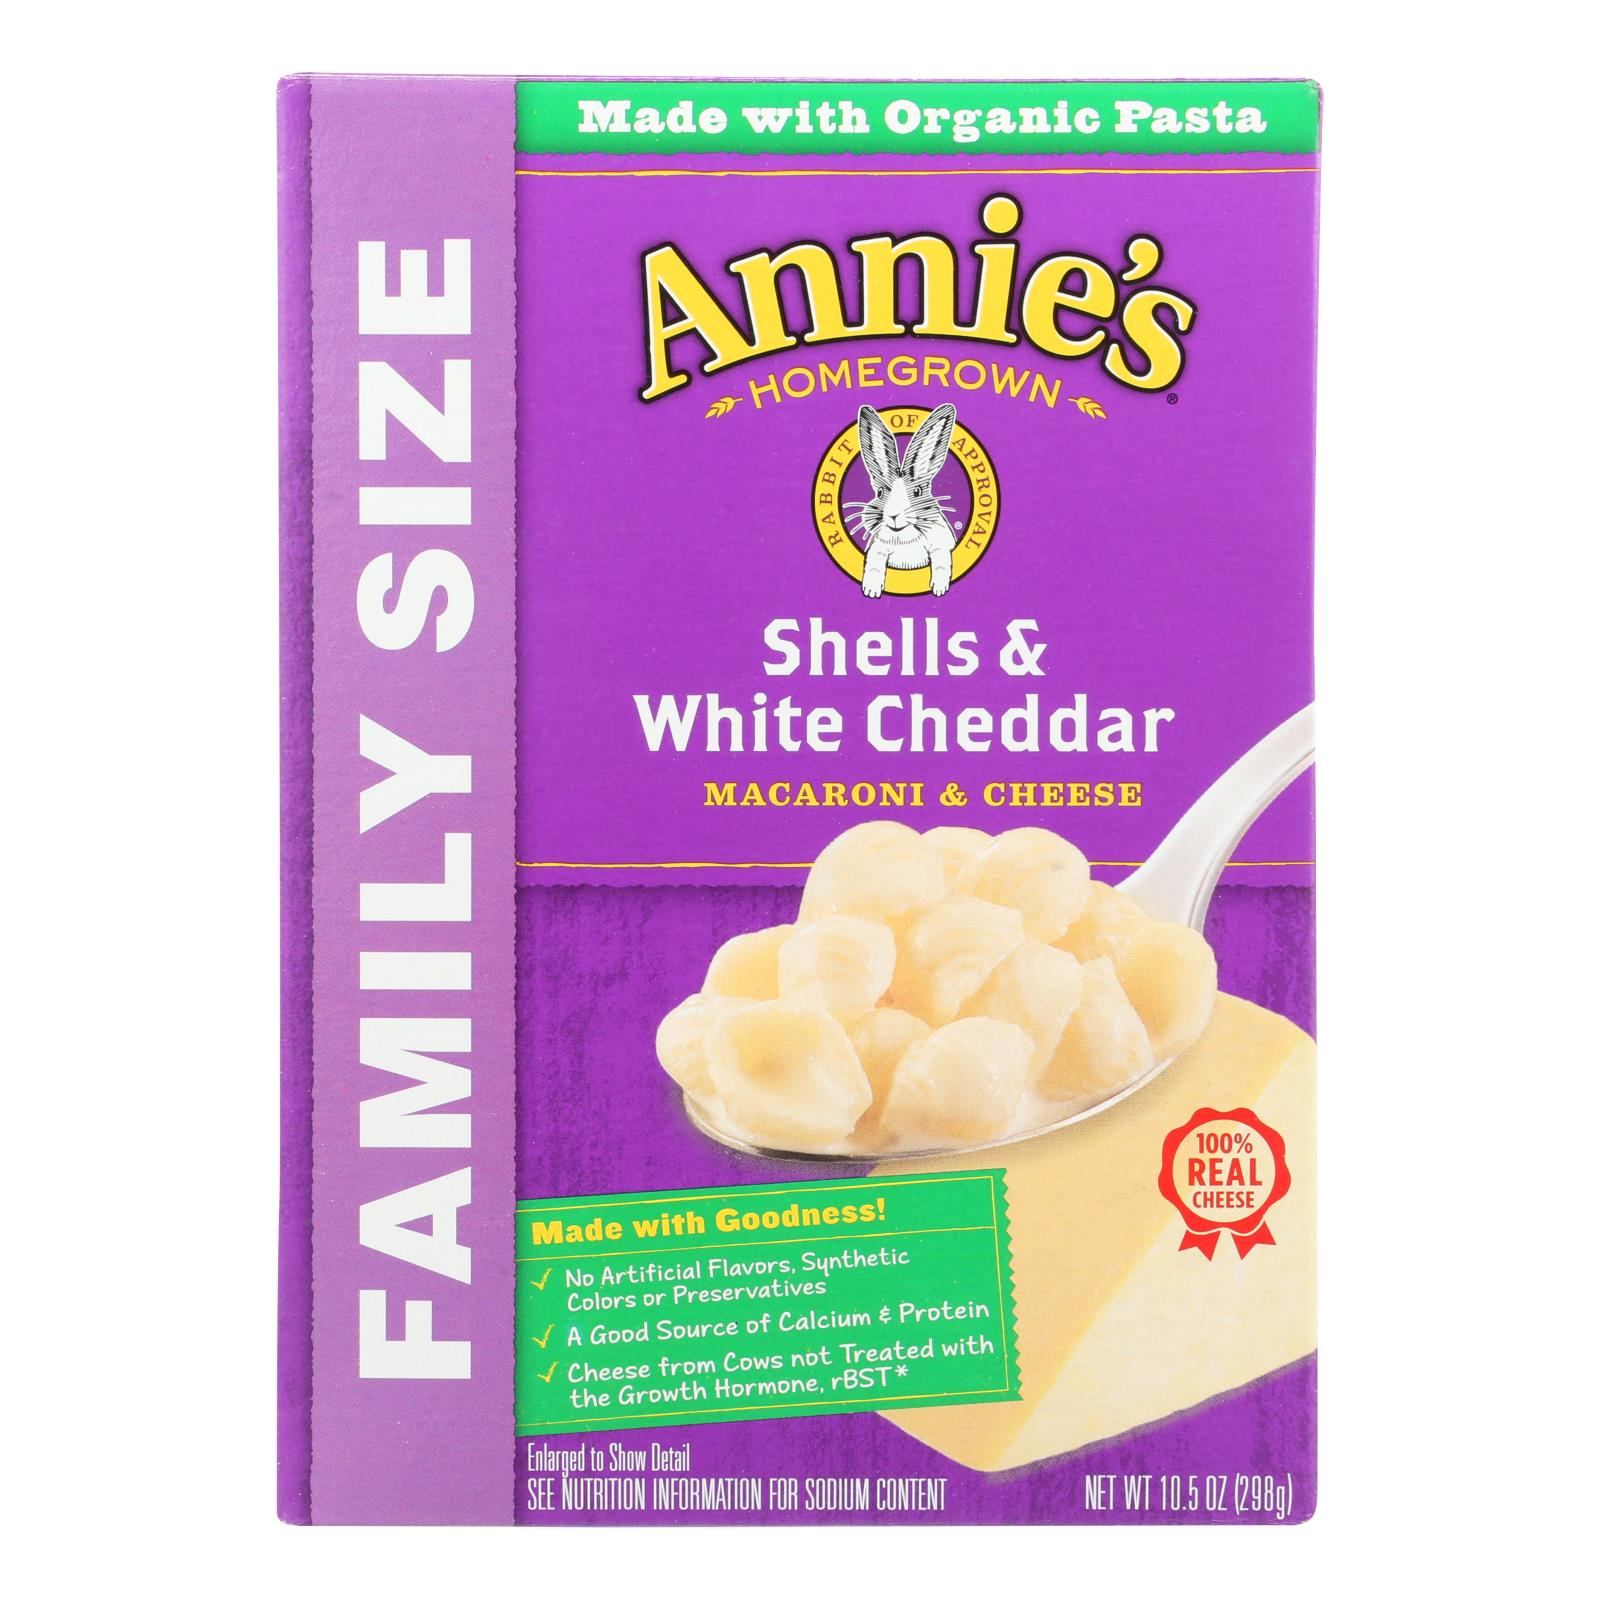 Annie'S Homegrown, Annie's Homegrown Family Size Shells and White Cheddar Mac and Cheese - Case of 6 - 10.5 oz. (Pack of 6)